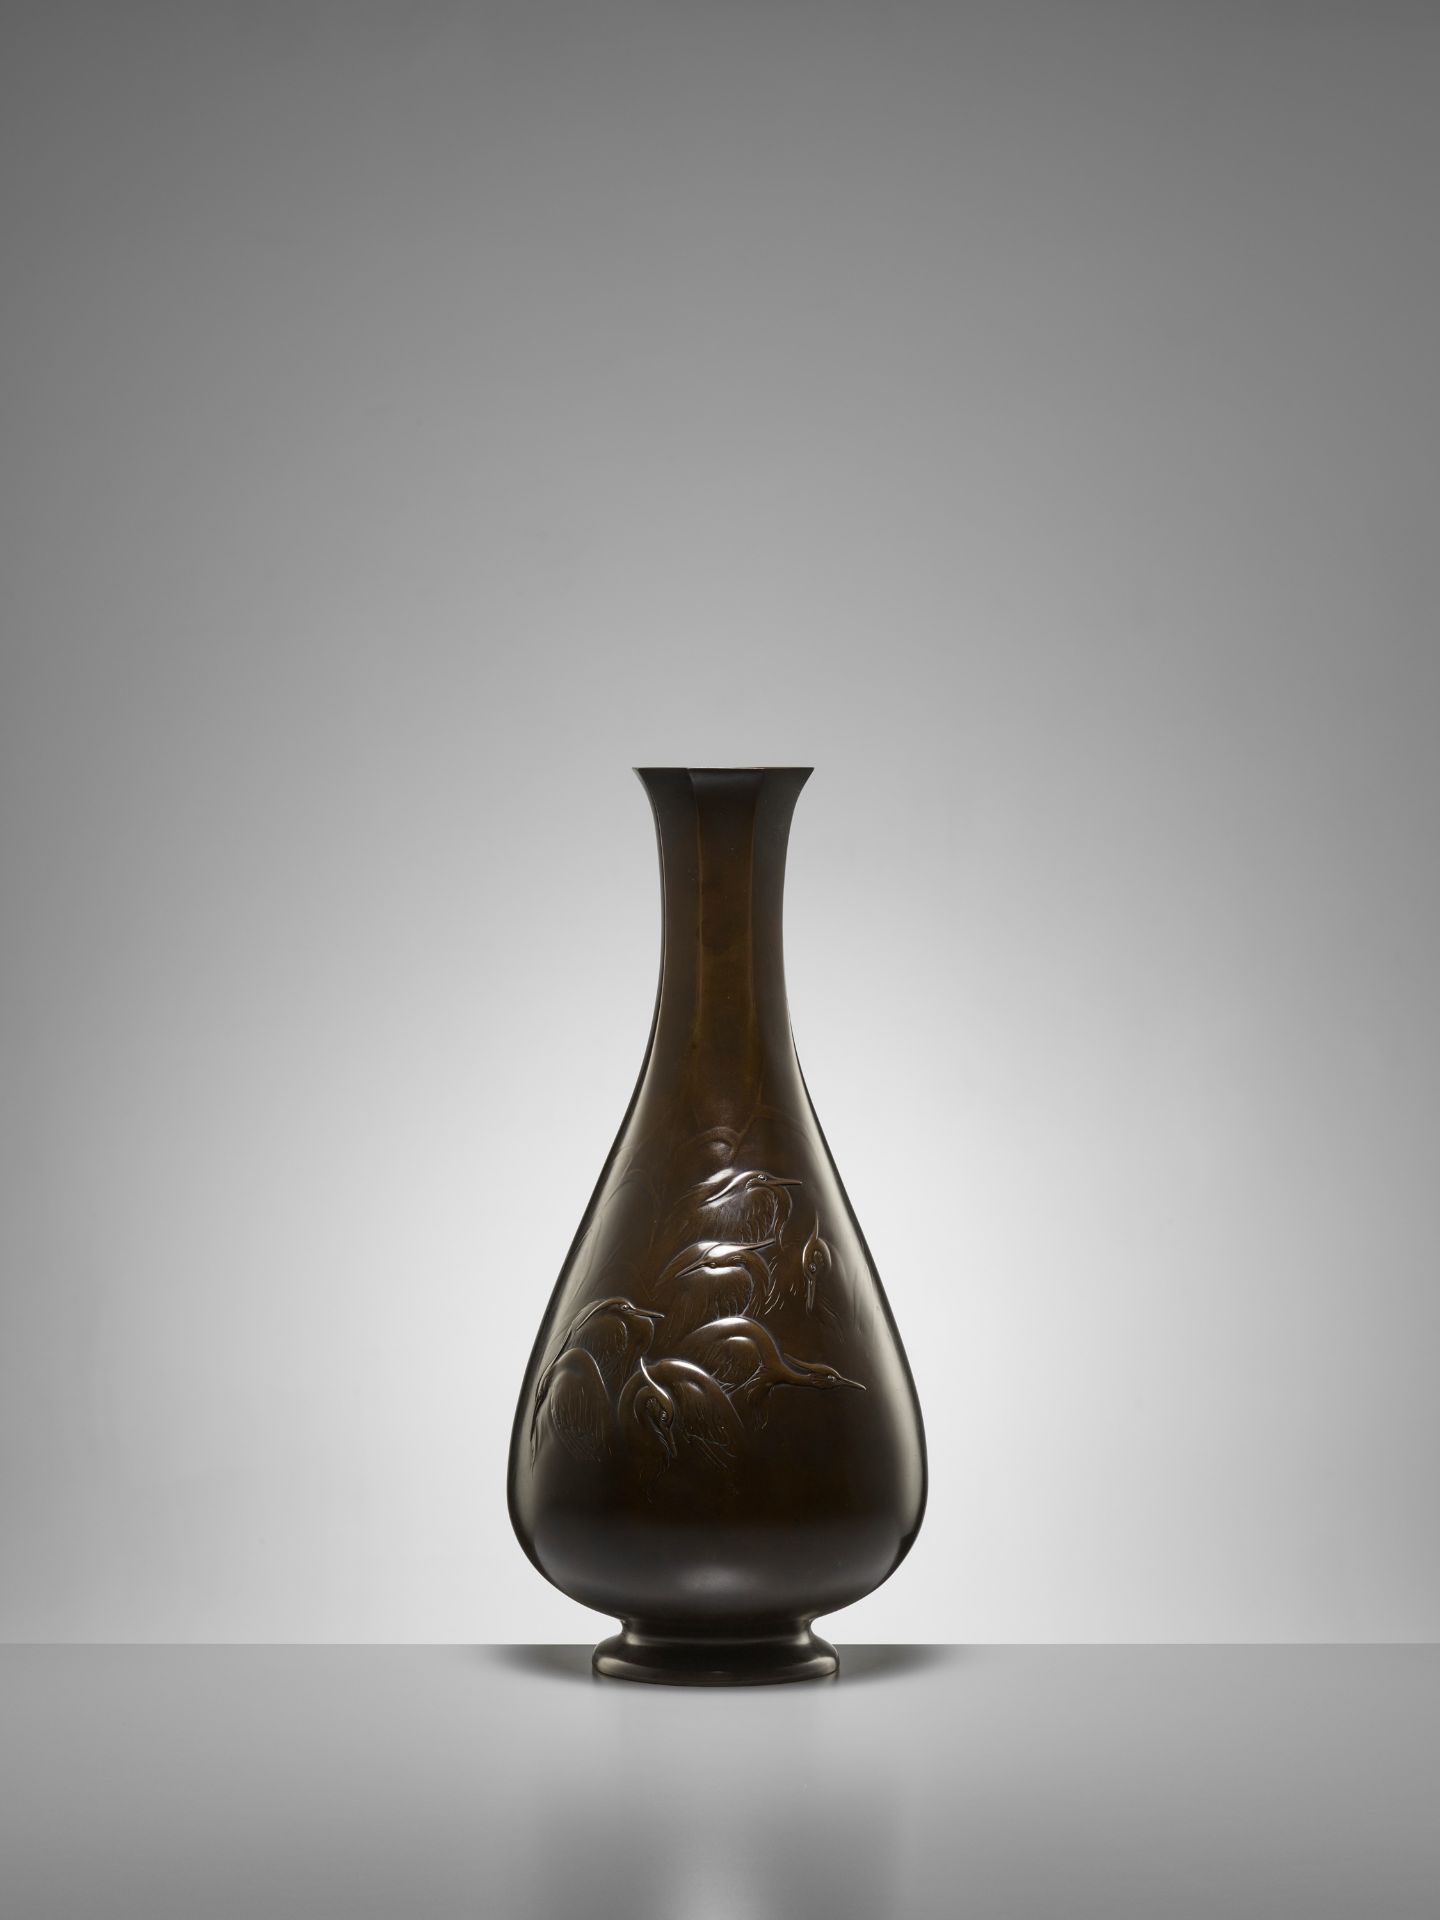 HIDEMITSU: A SUPERB AND LARGE BRONZE VASE DEPICTING HERONS AND LOTUS - Image 2 of 10